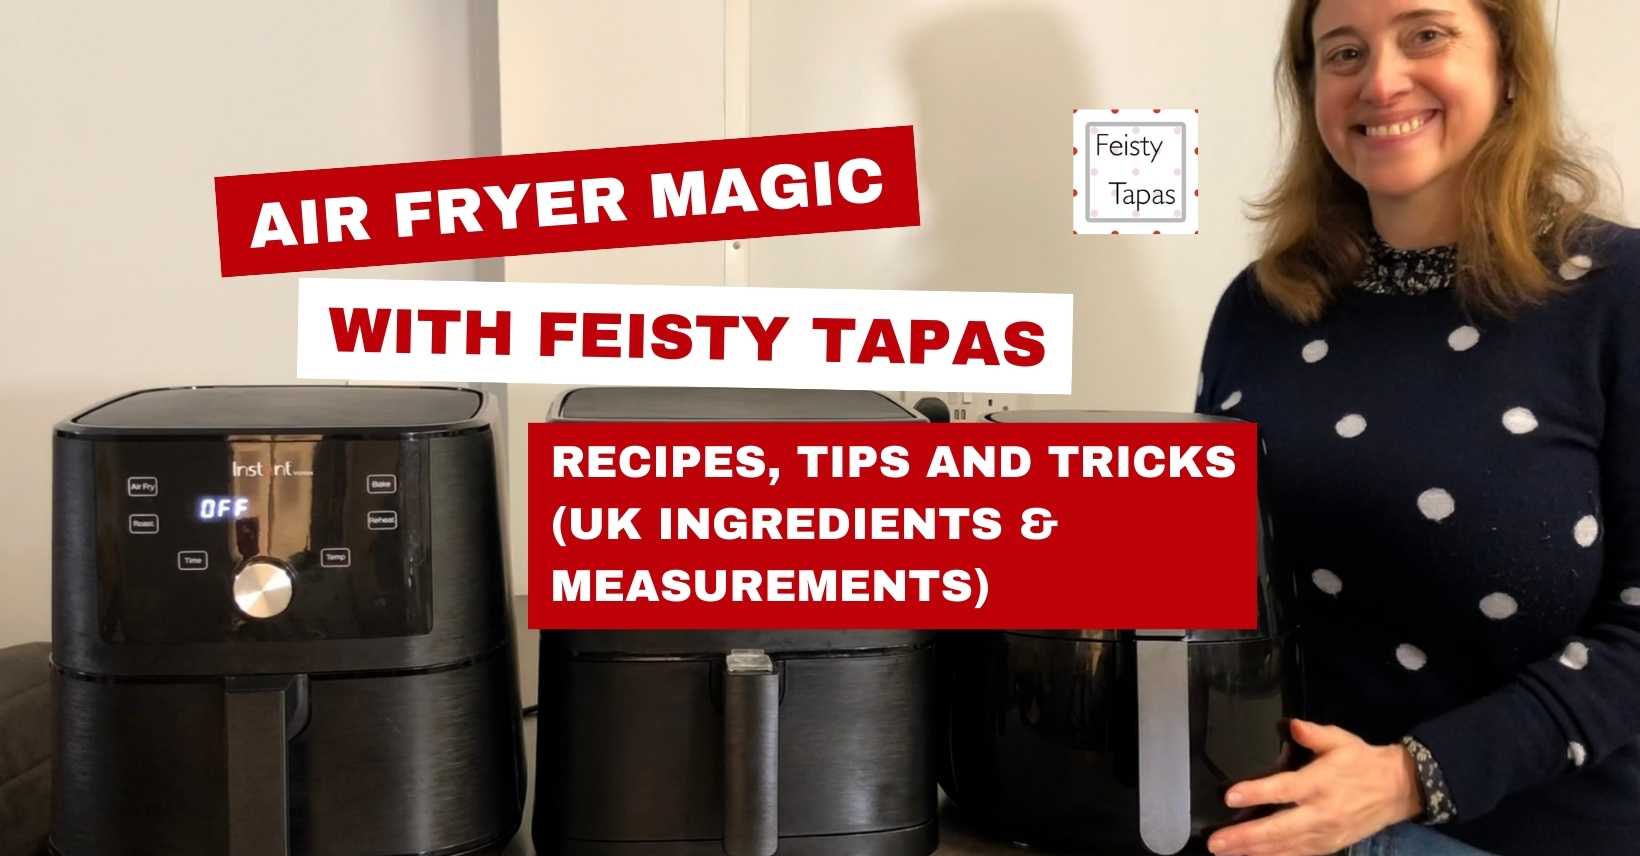 A photo of Maria (on the right) in a navy blue jumper with white polka dots, next to three black air fryers (Instant Cosori, Vortex and Philips). The words say: Air Fryer Magic with Feisty Tapas (the name of Maria's air fryer group), as well as Recipes, tips and tricks (UK ingredients and measurements)